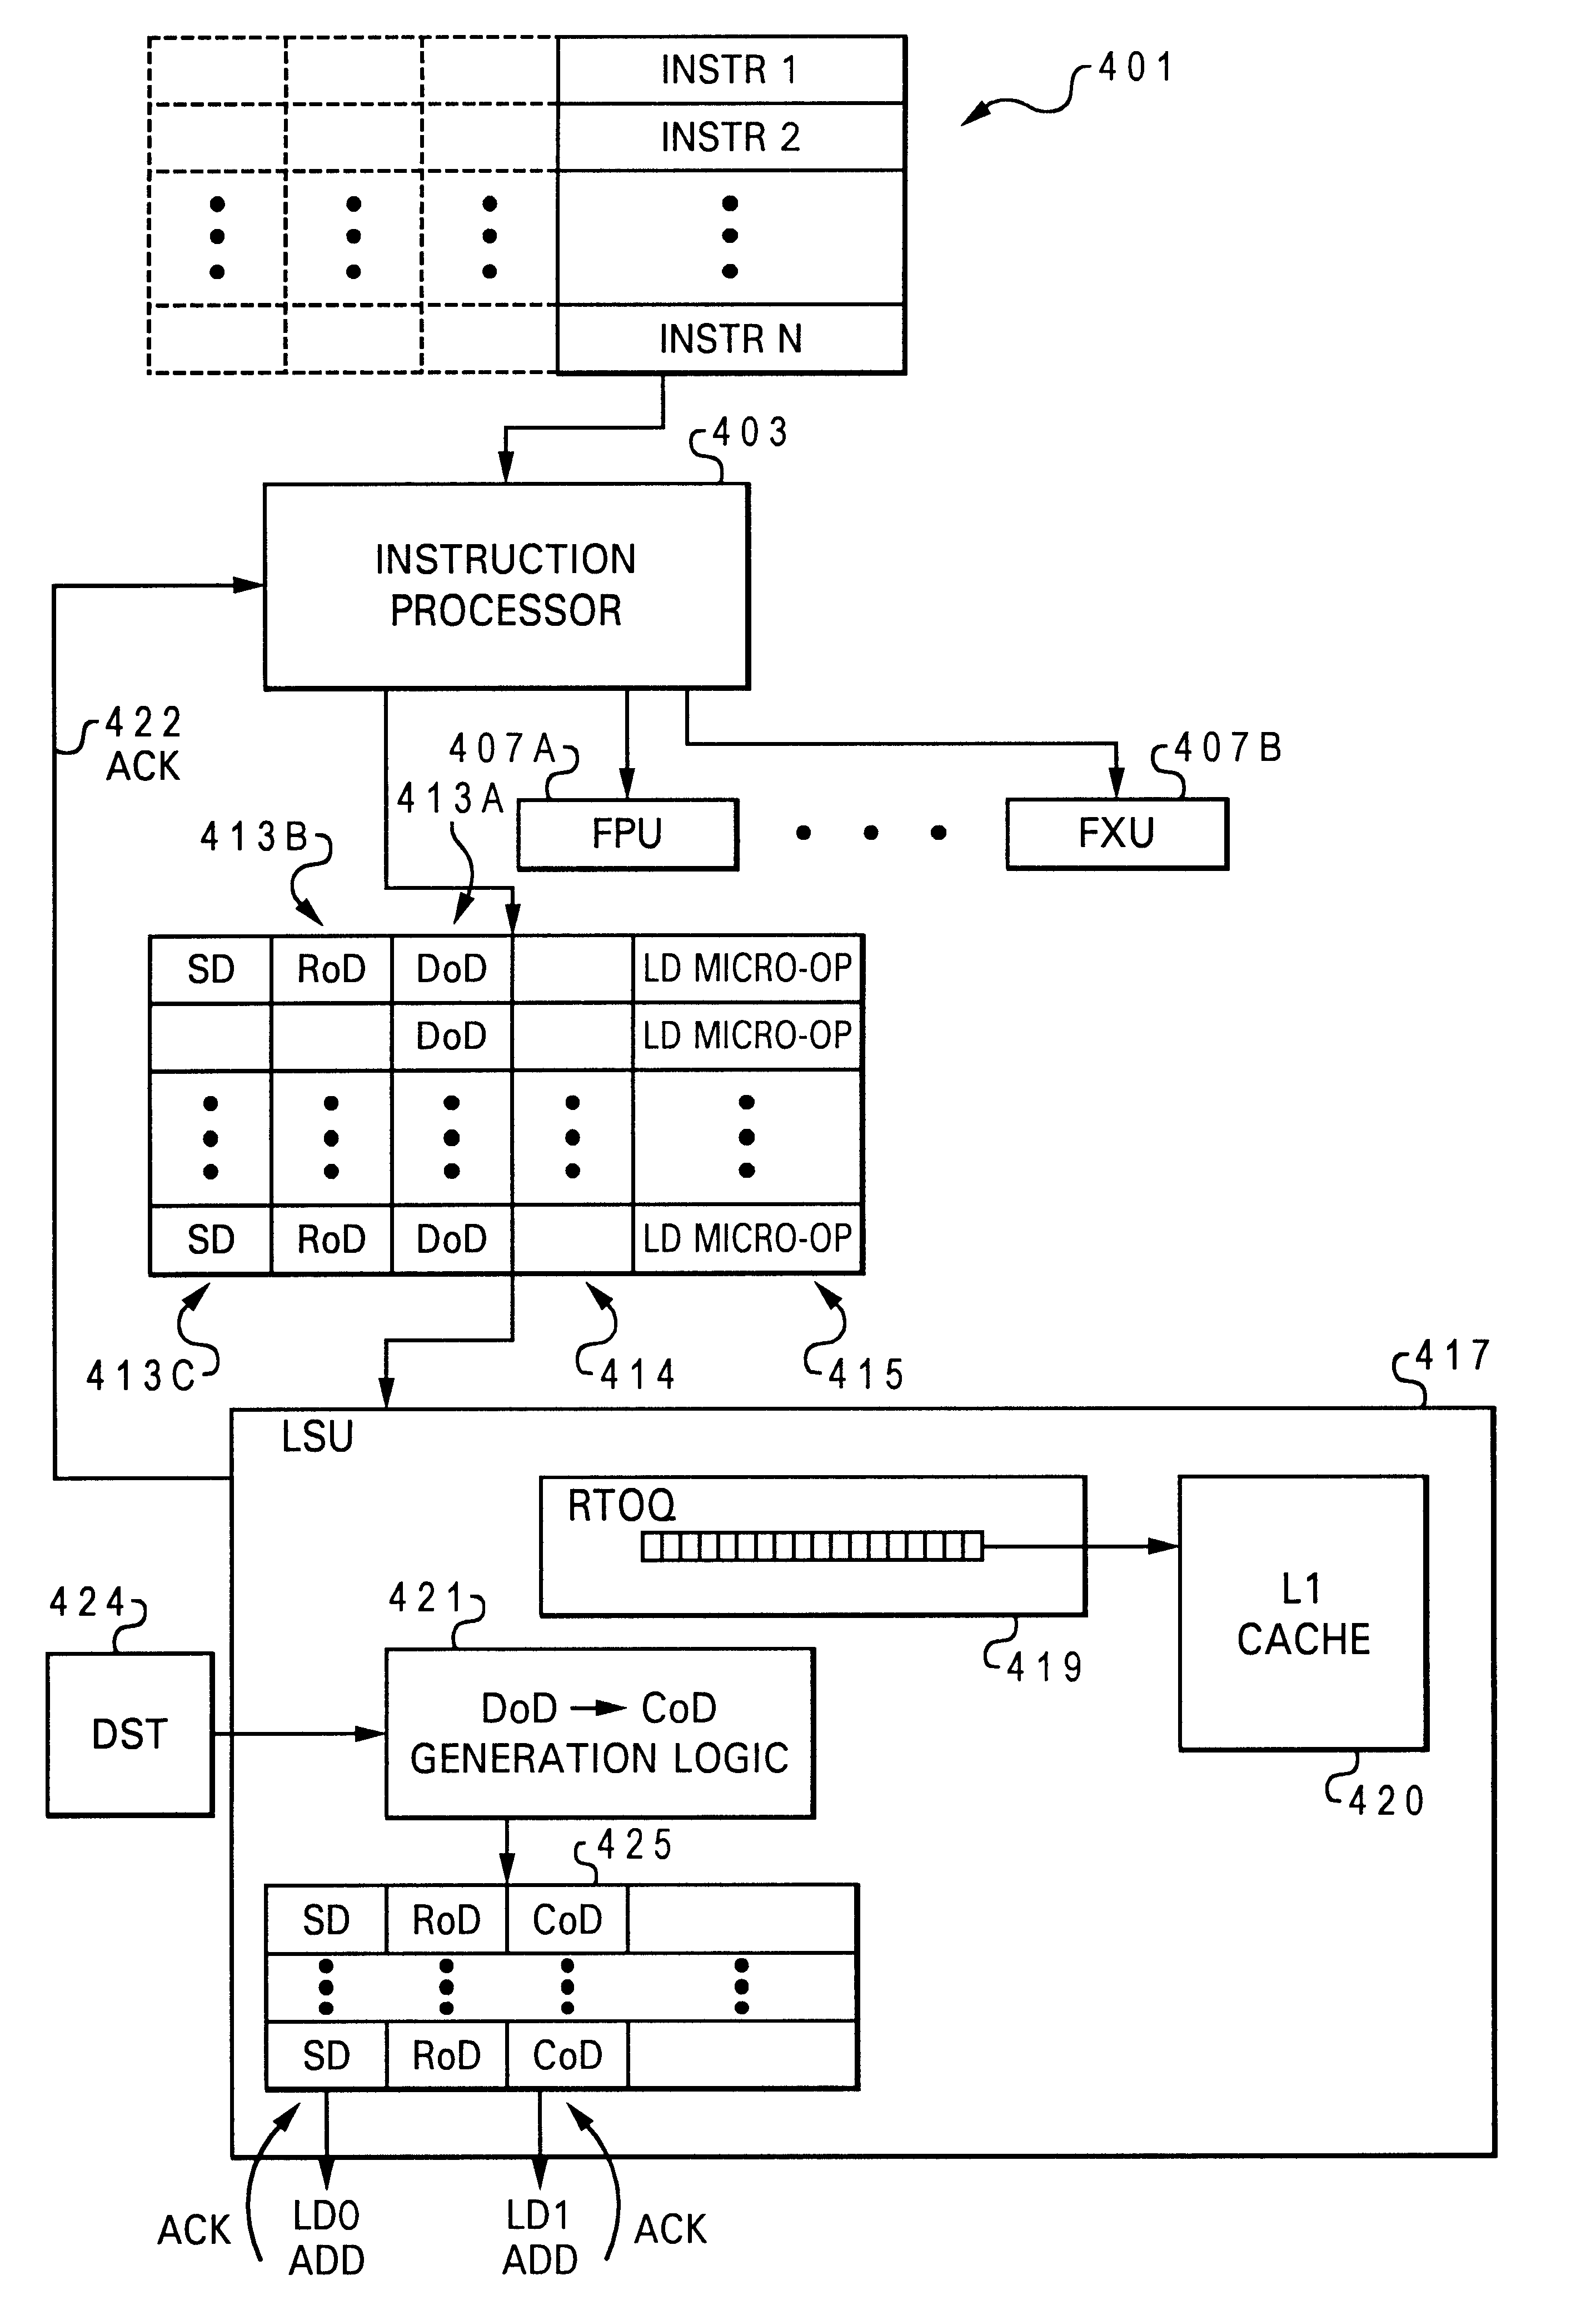 Method for alternate preferred time delivery of load data